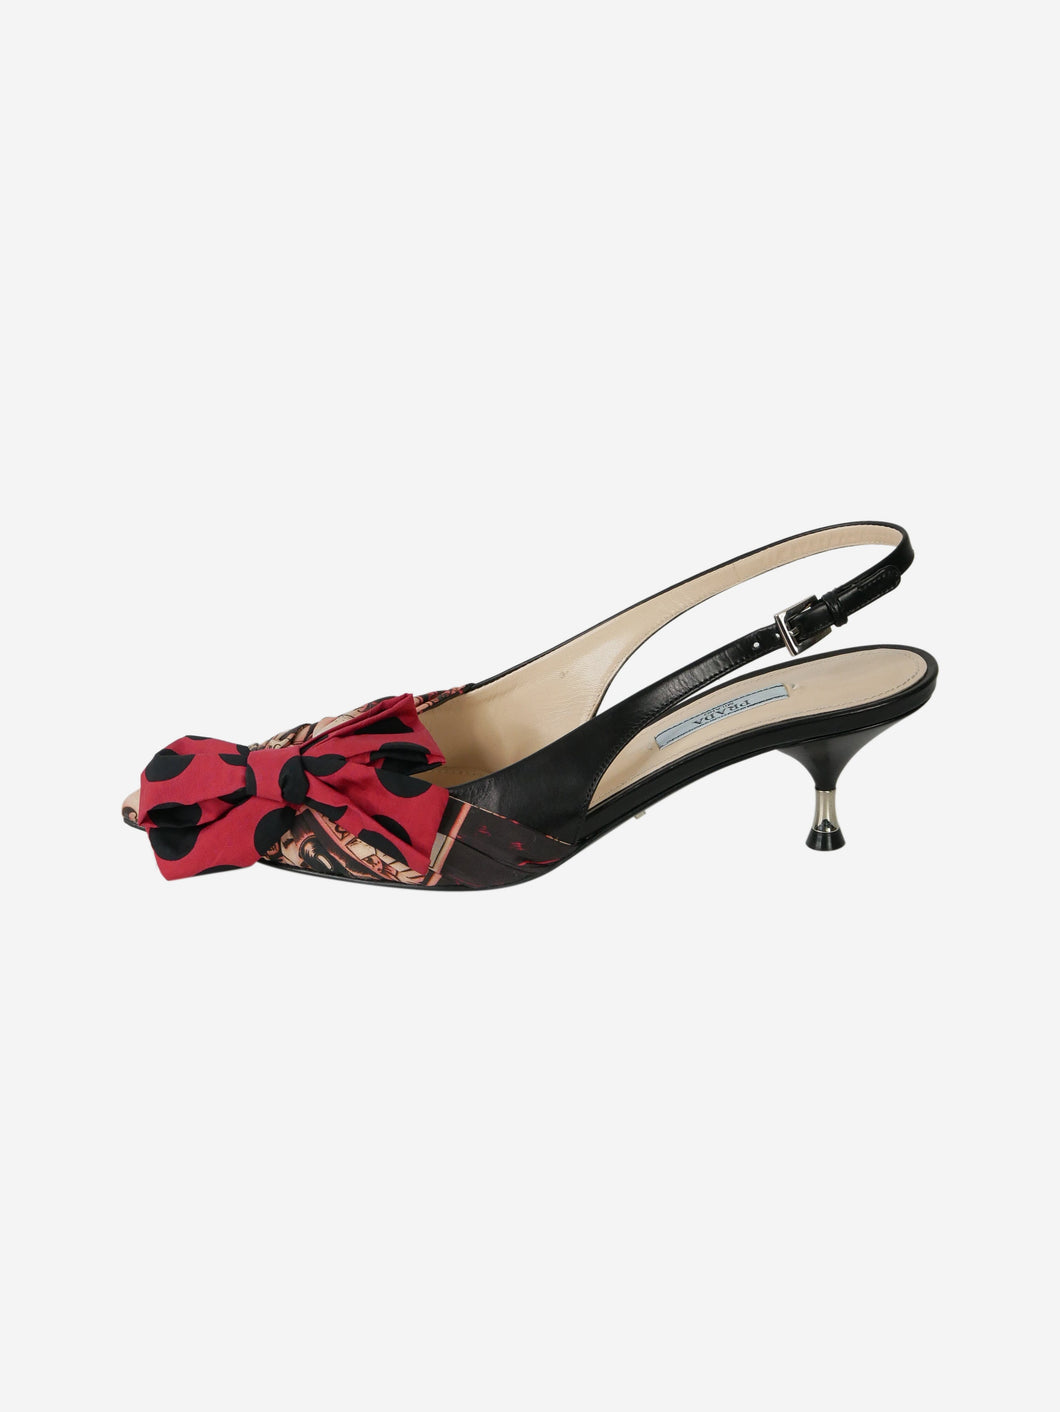 Prada pre-owned red patterned fabric bow sandal heels | SOTT